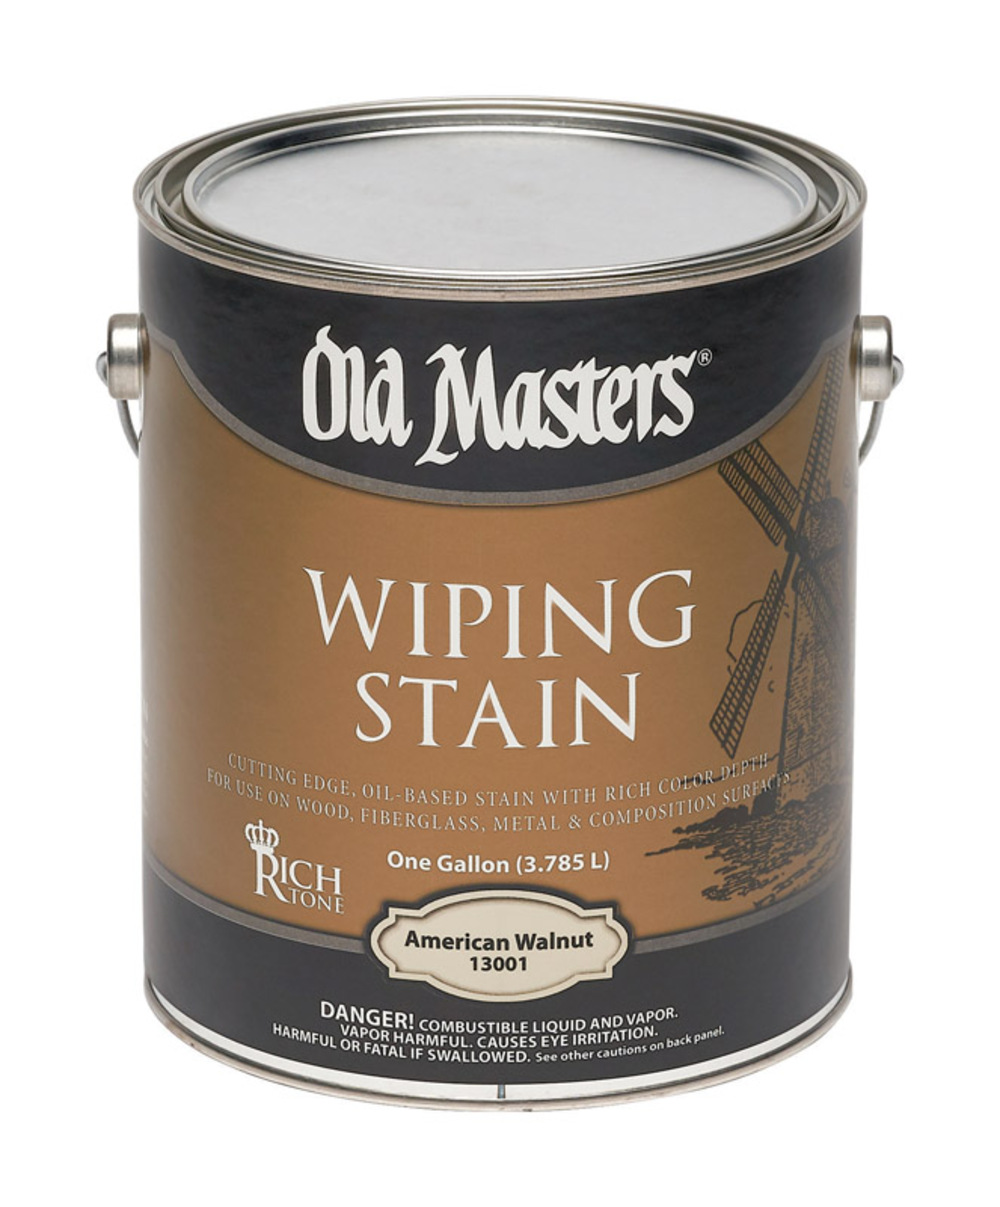 Old Masters Semi-Transparent American Walnut Oil-Based Wiping Stain 1 gal - image 3 of 3